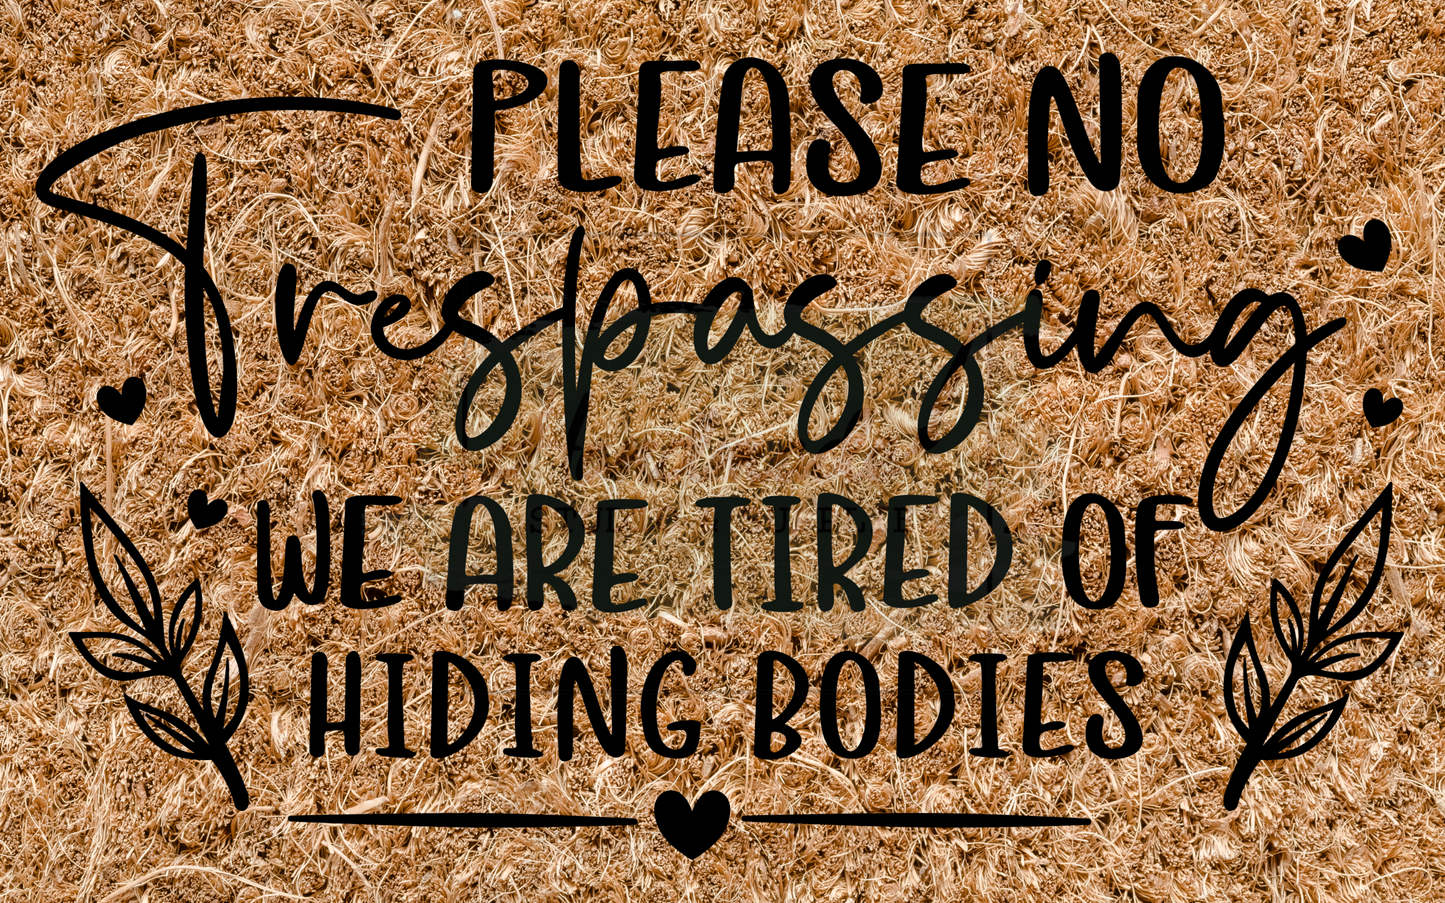 Please no trespassing we are tired of hiding bodies - greenery/hearts